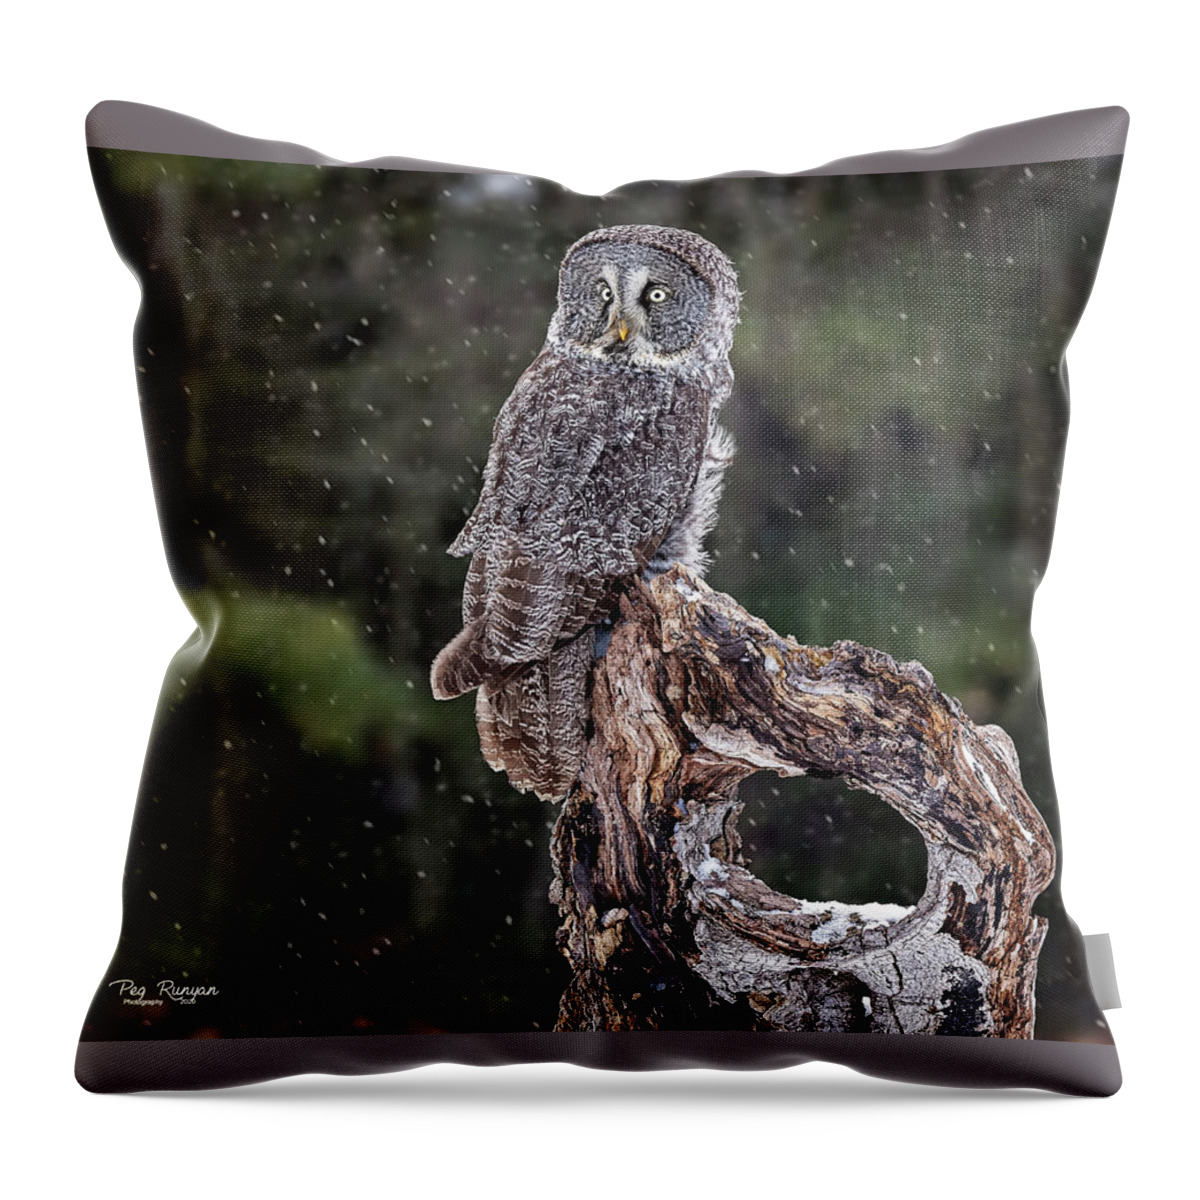 Owl Throw Pillow featuring the photograph The Great Gray by Peg Runyan